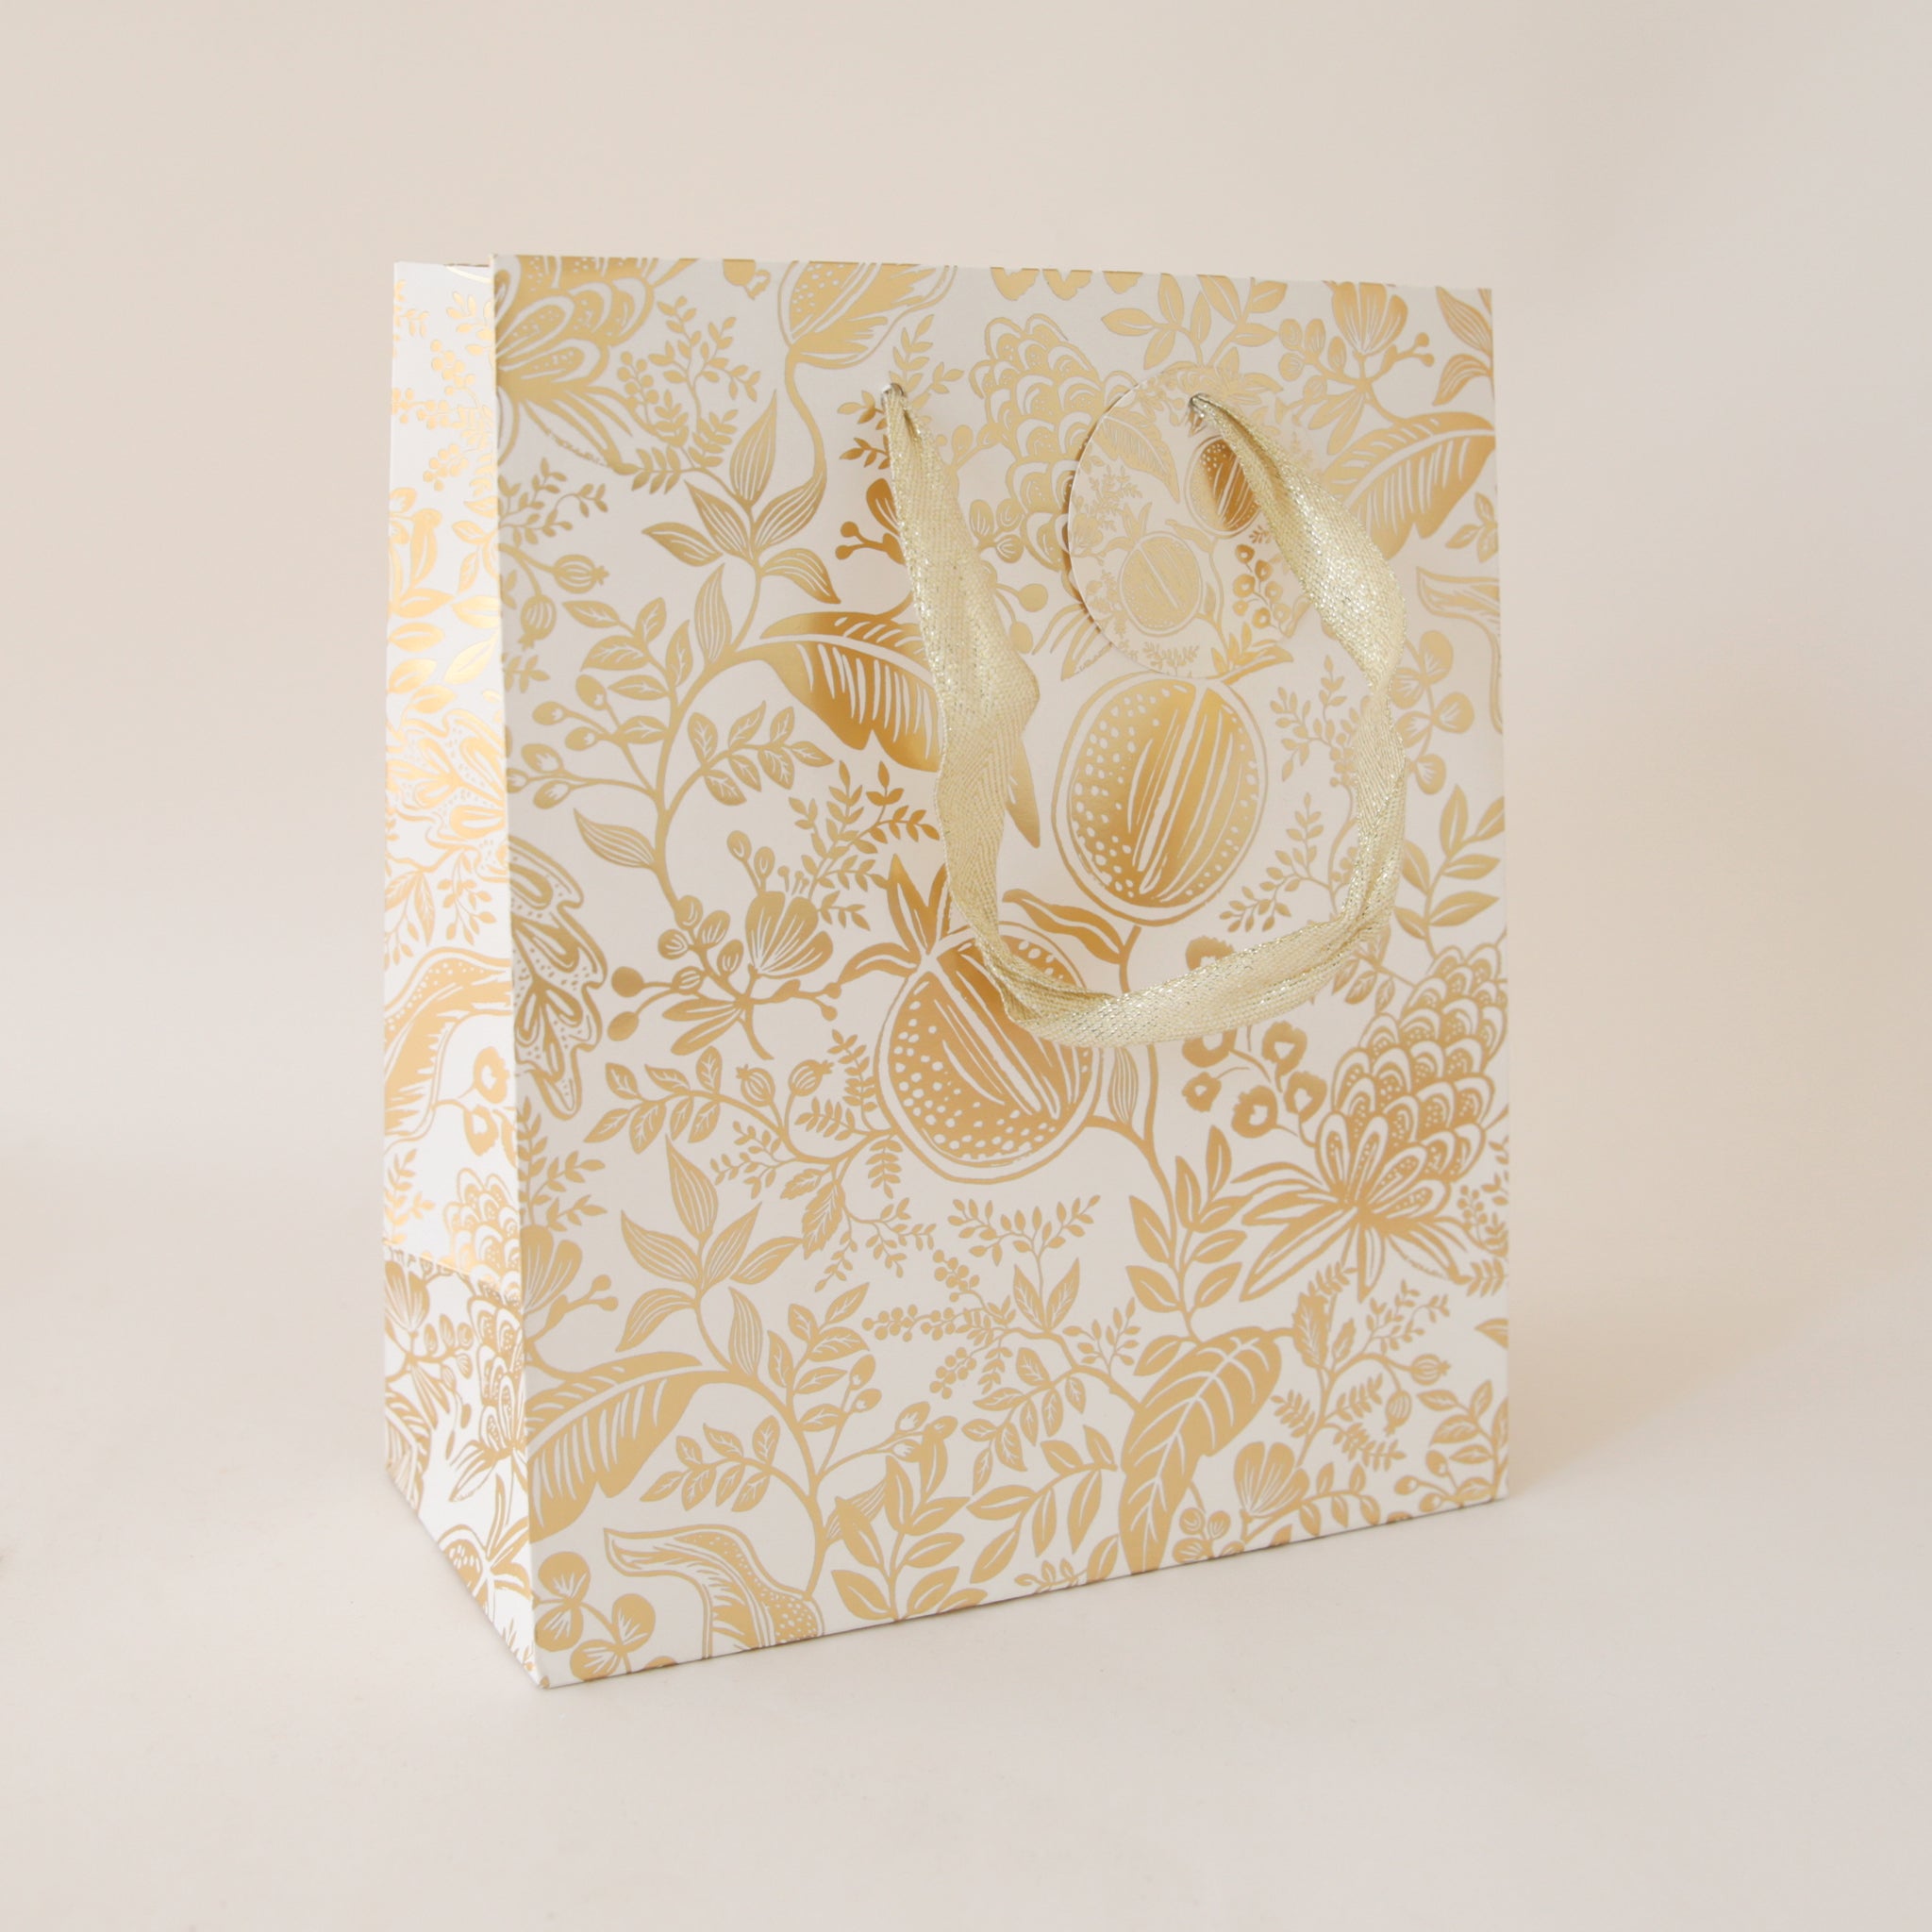 A 9.5&quot; x 8&quot; gold foiled gift bag with metallic cotton handles and a to and from tag.